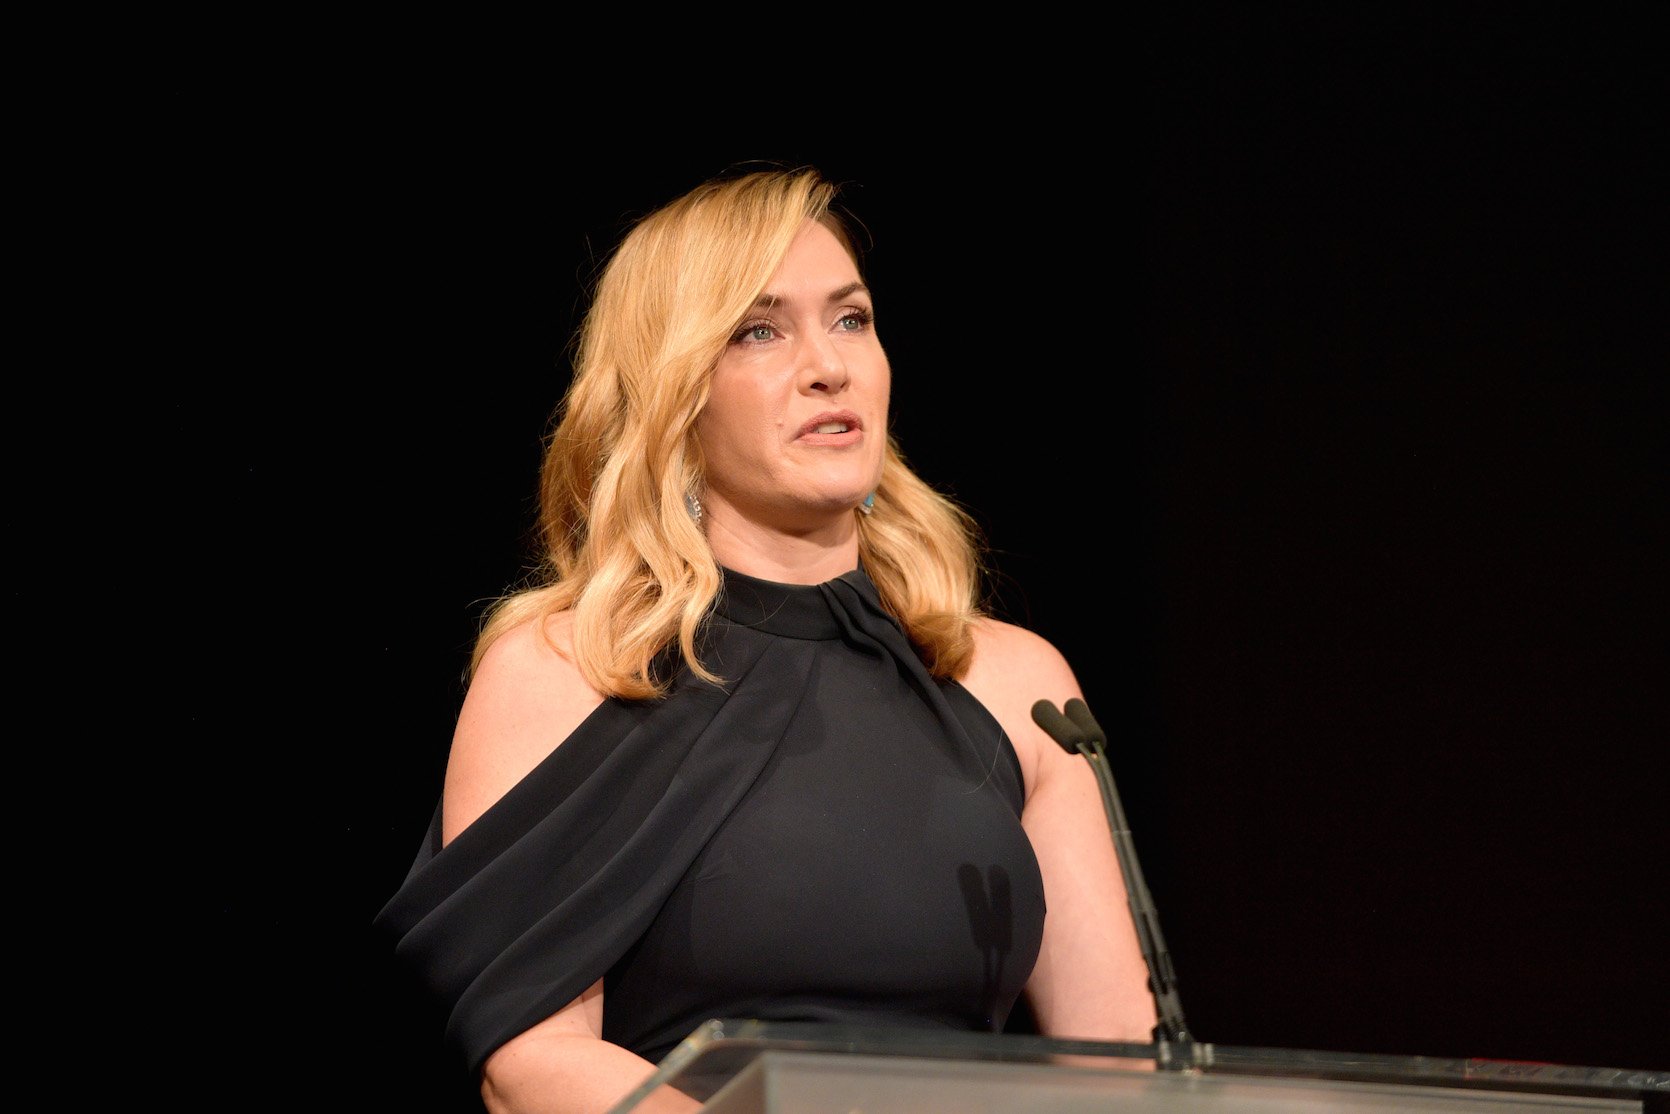 Kate Winslet in a black dress accepting an award at a podium